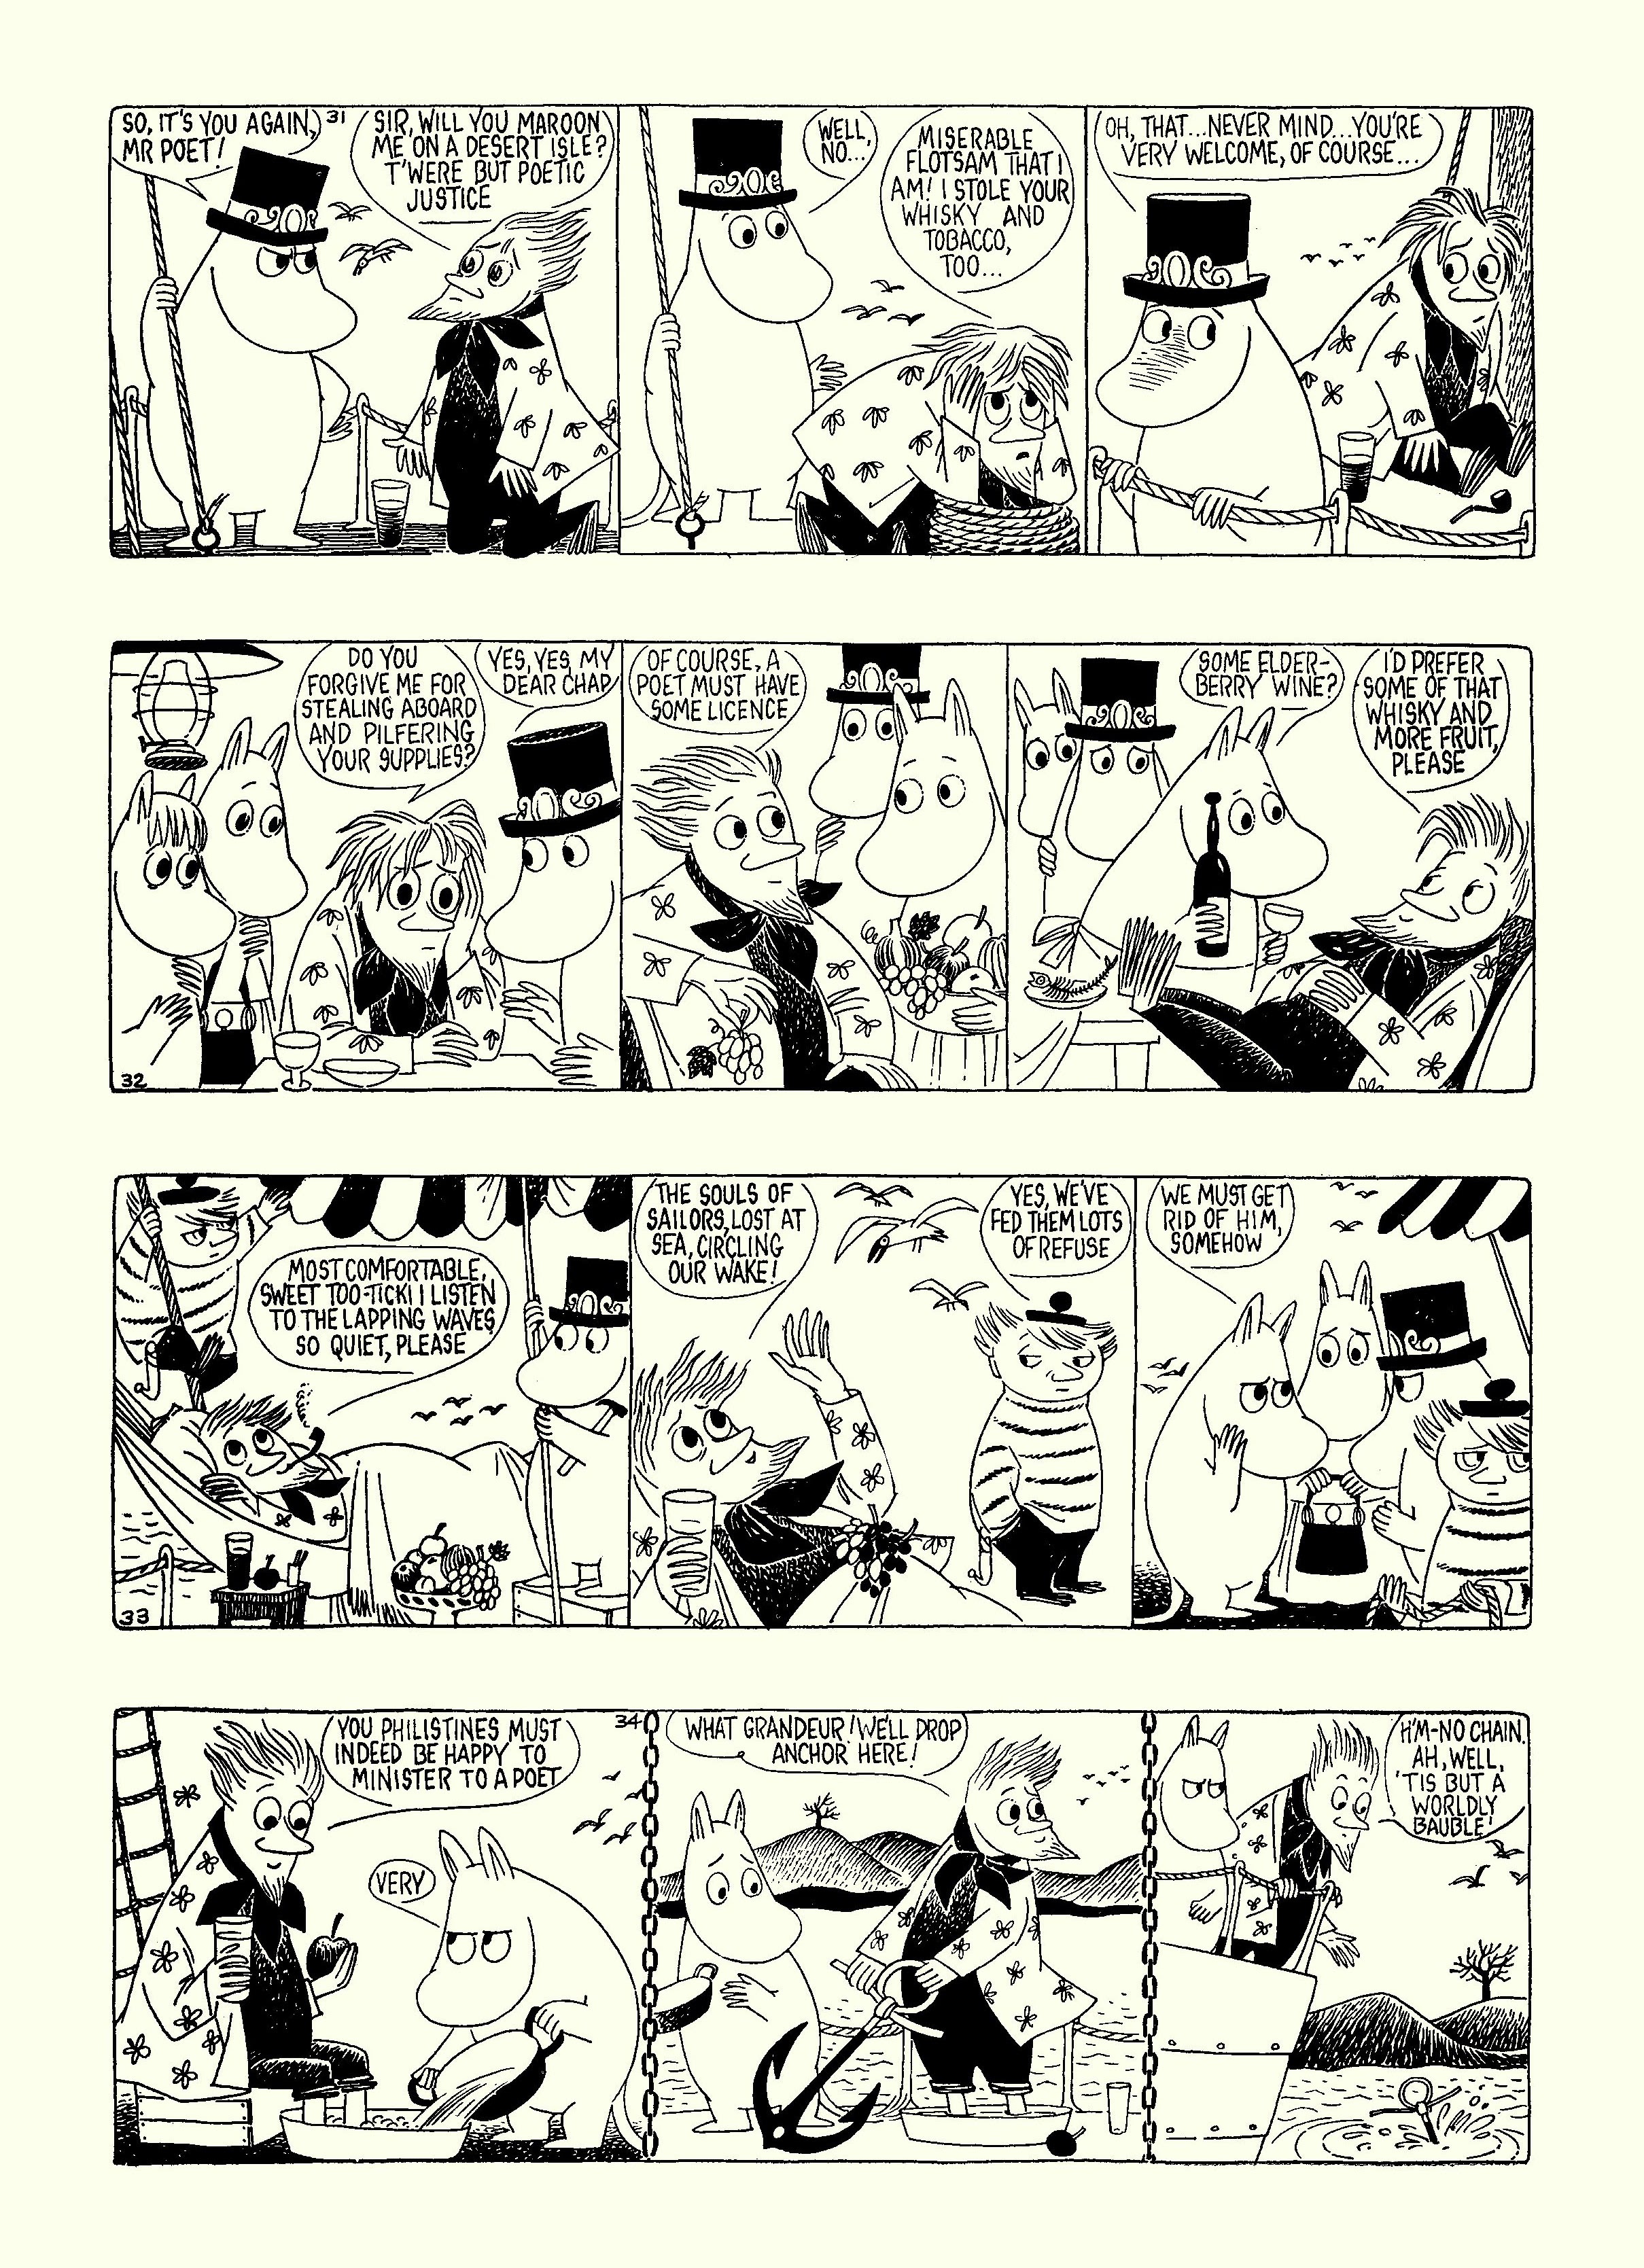 Read online Moomin: The Complete Tove Jansson Comic Strip comic -  Issue # TPB 5 - 39